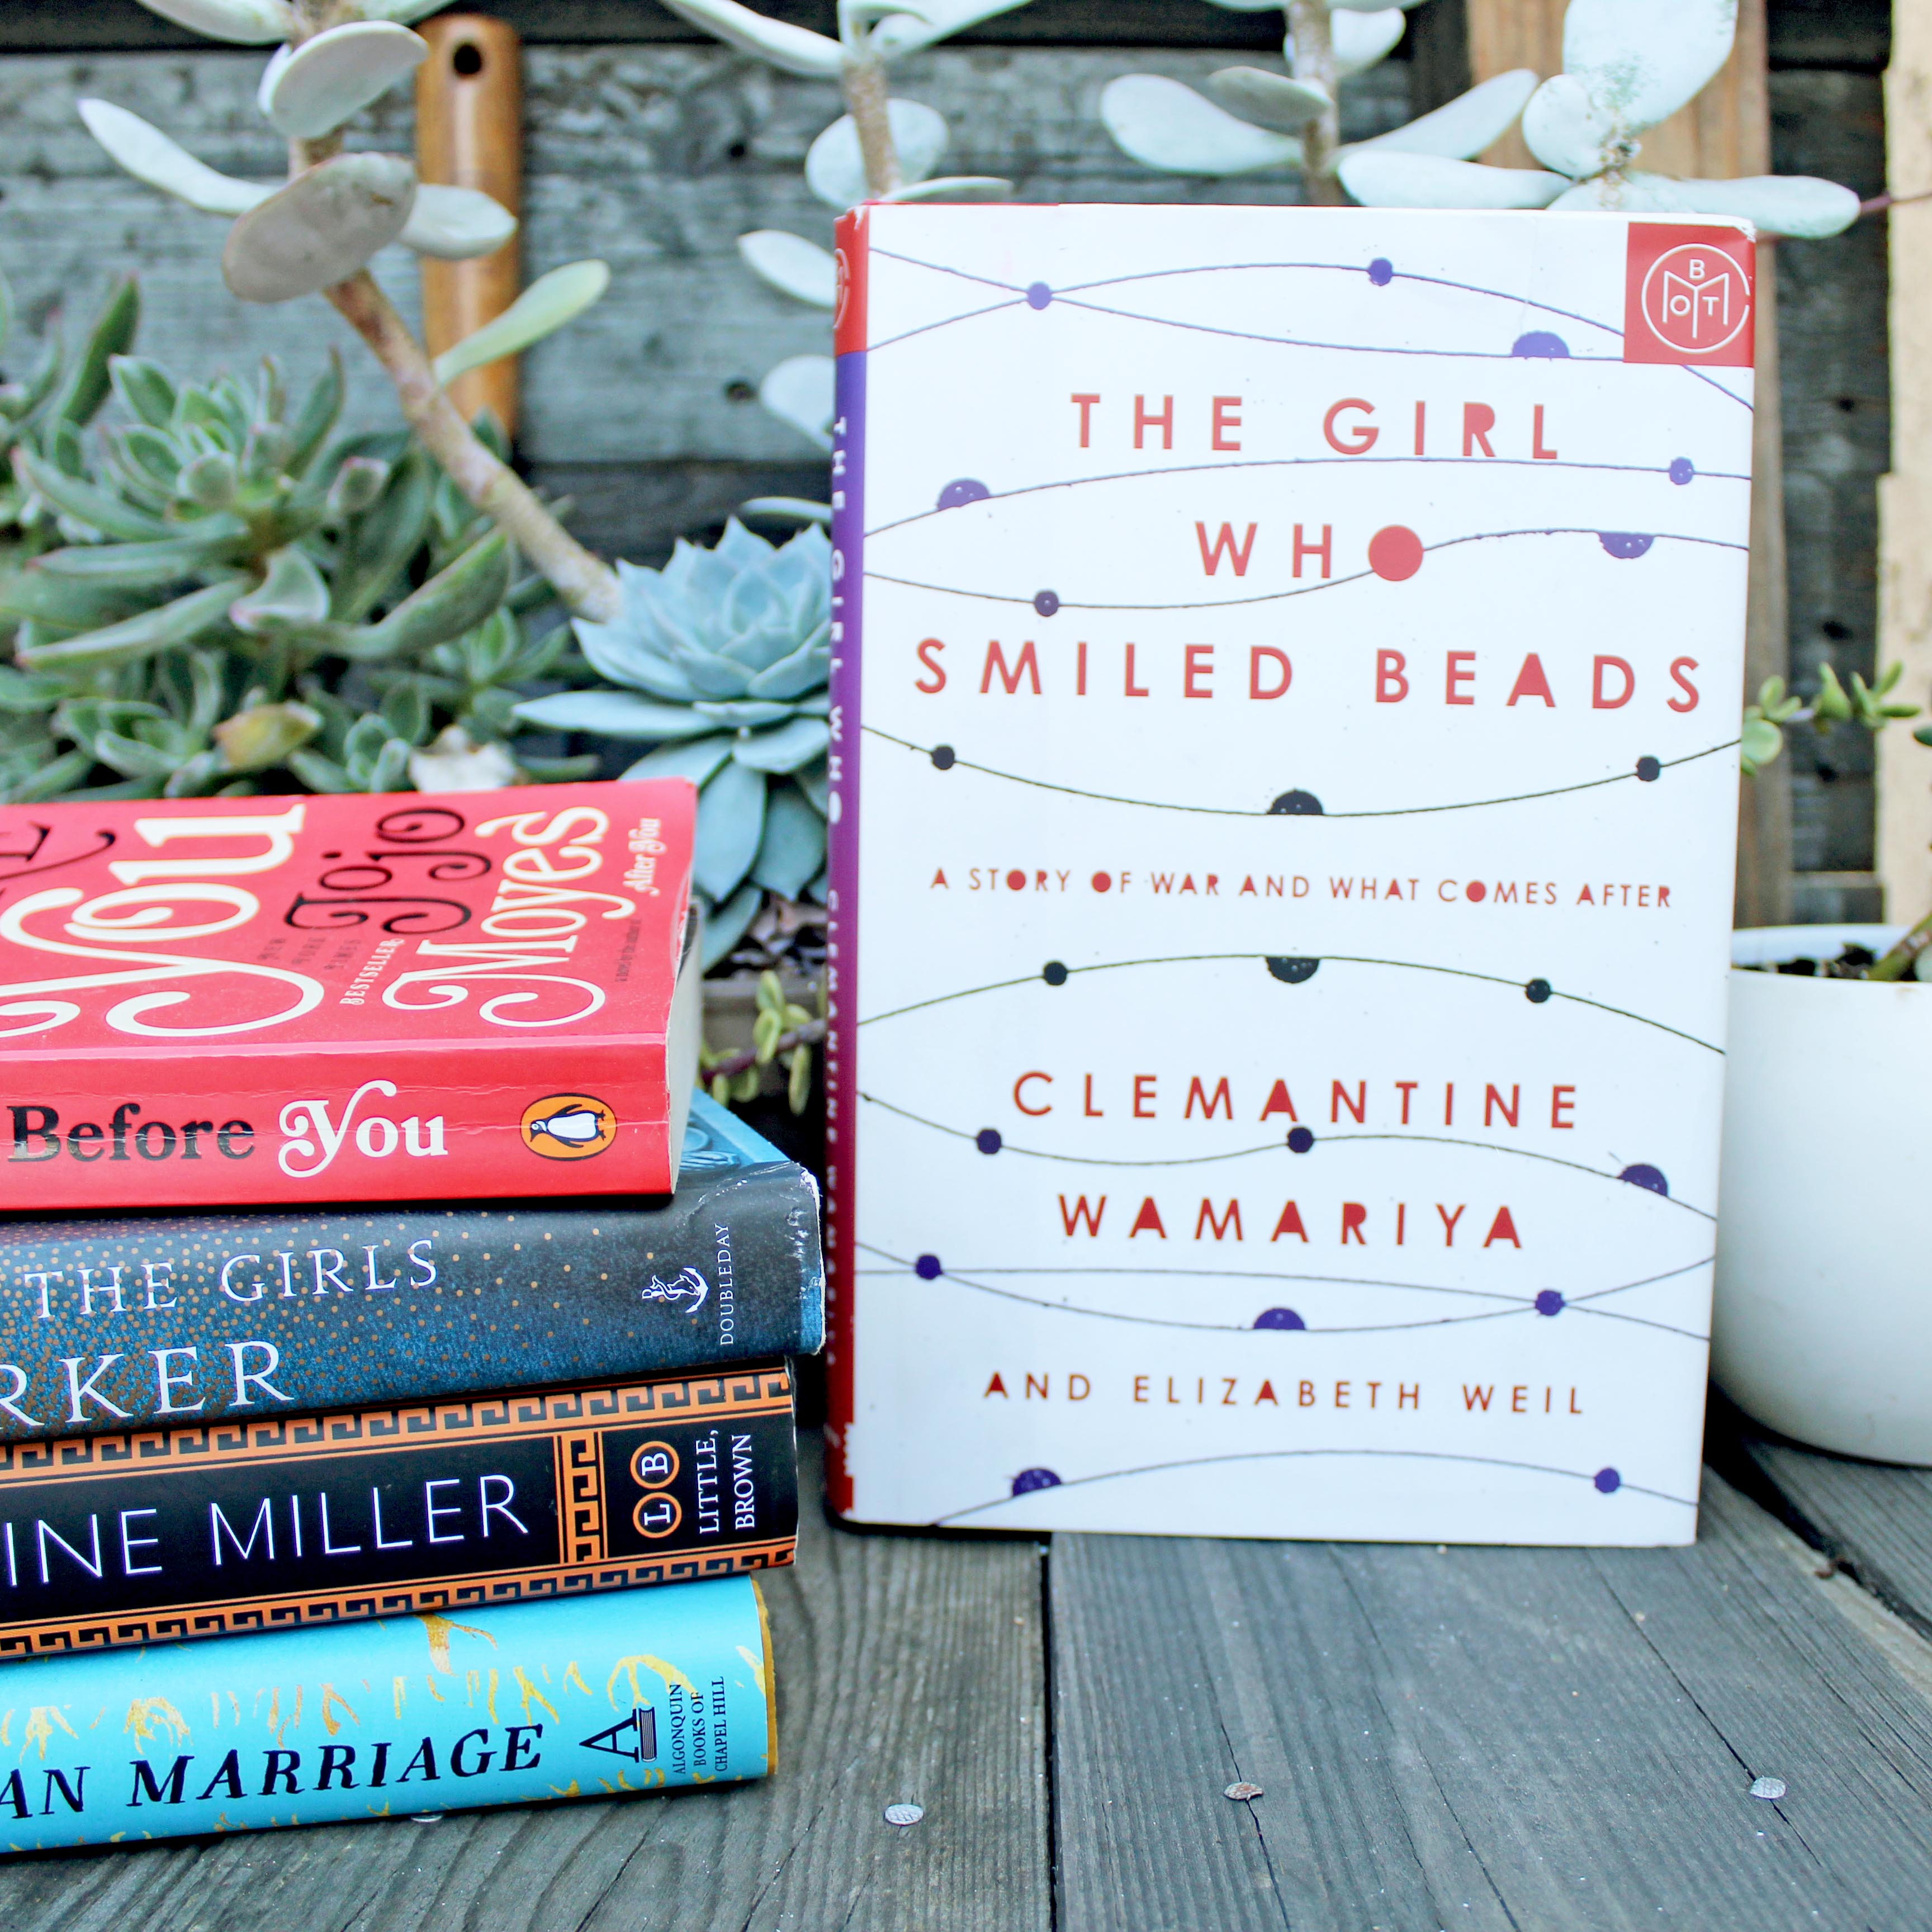 5 Favorite Sewing Projects & Reads "The Girl Who Smiled Beads"